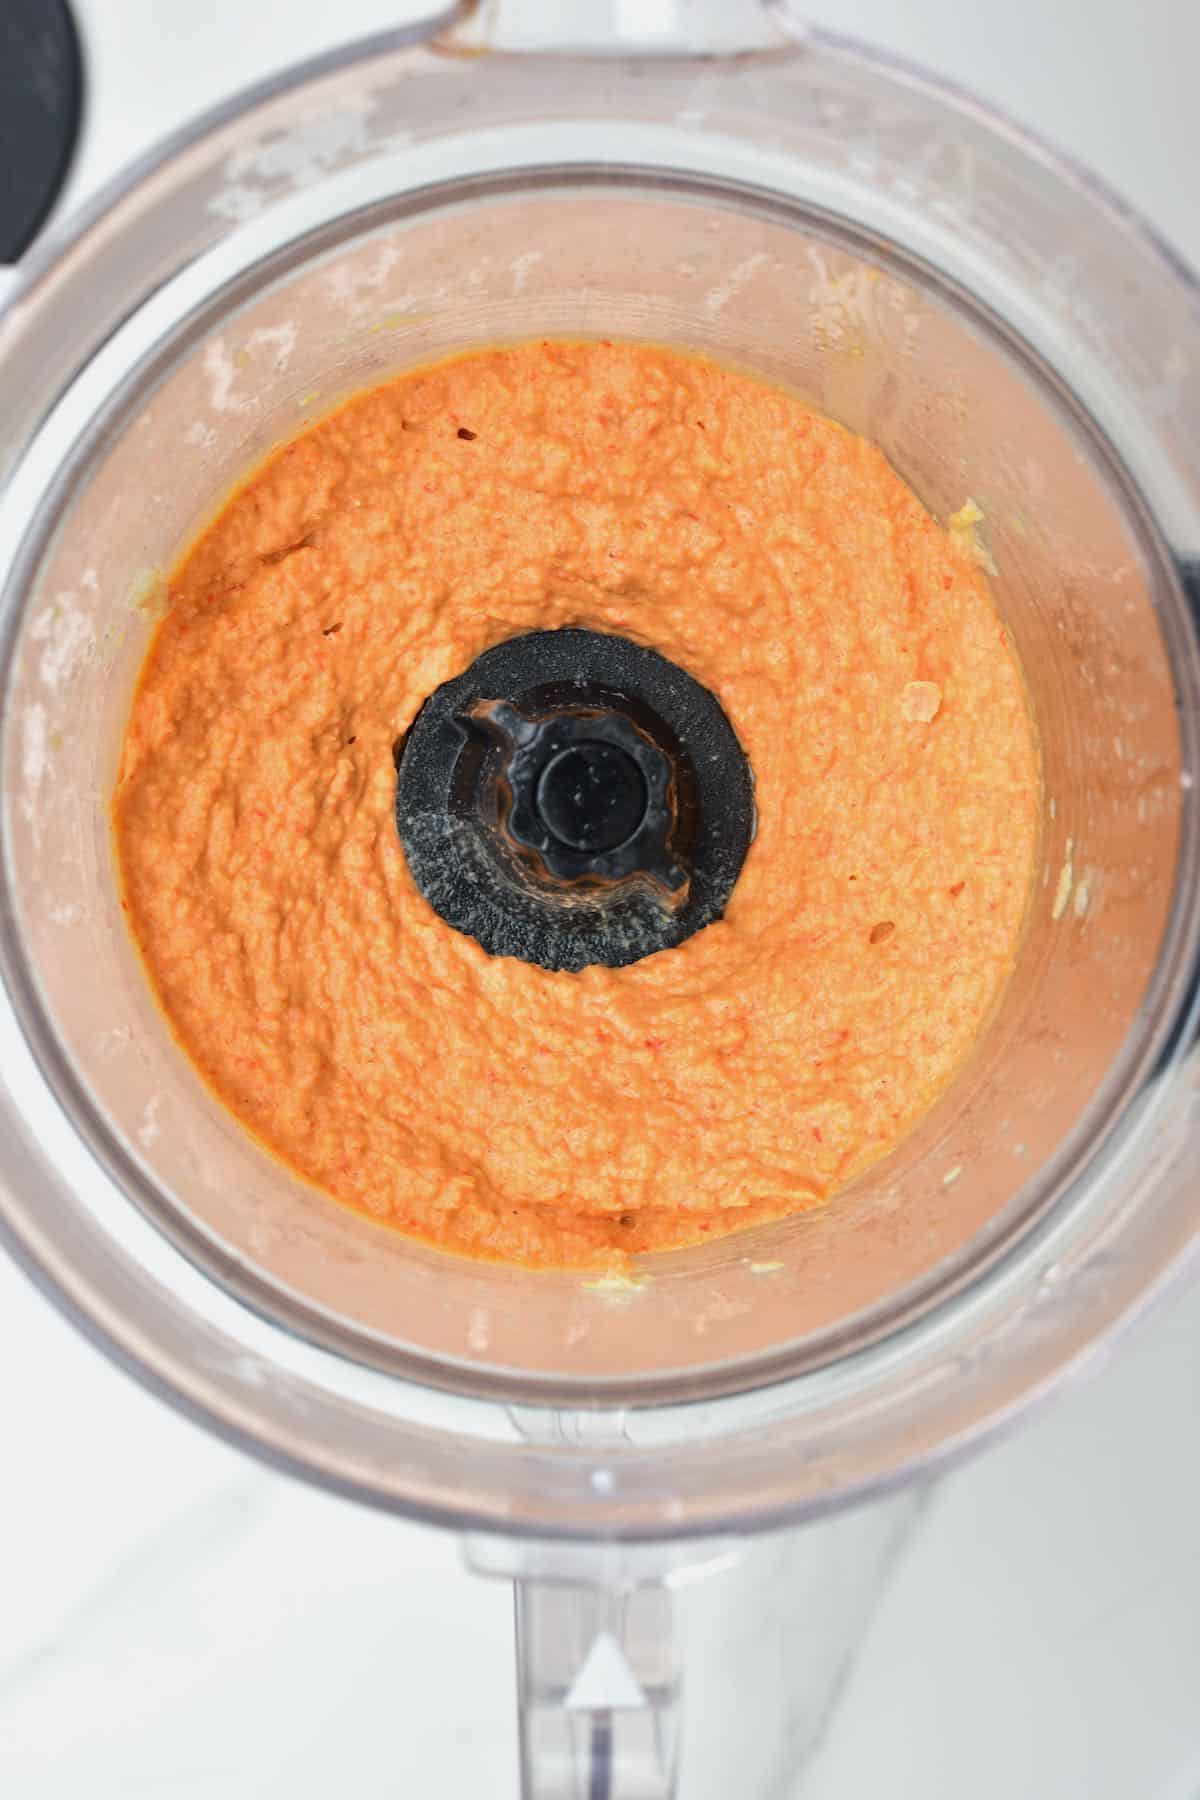 Roasted red pepper hummus in a blender